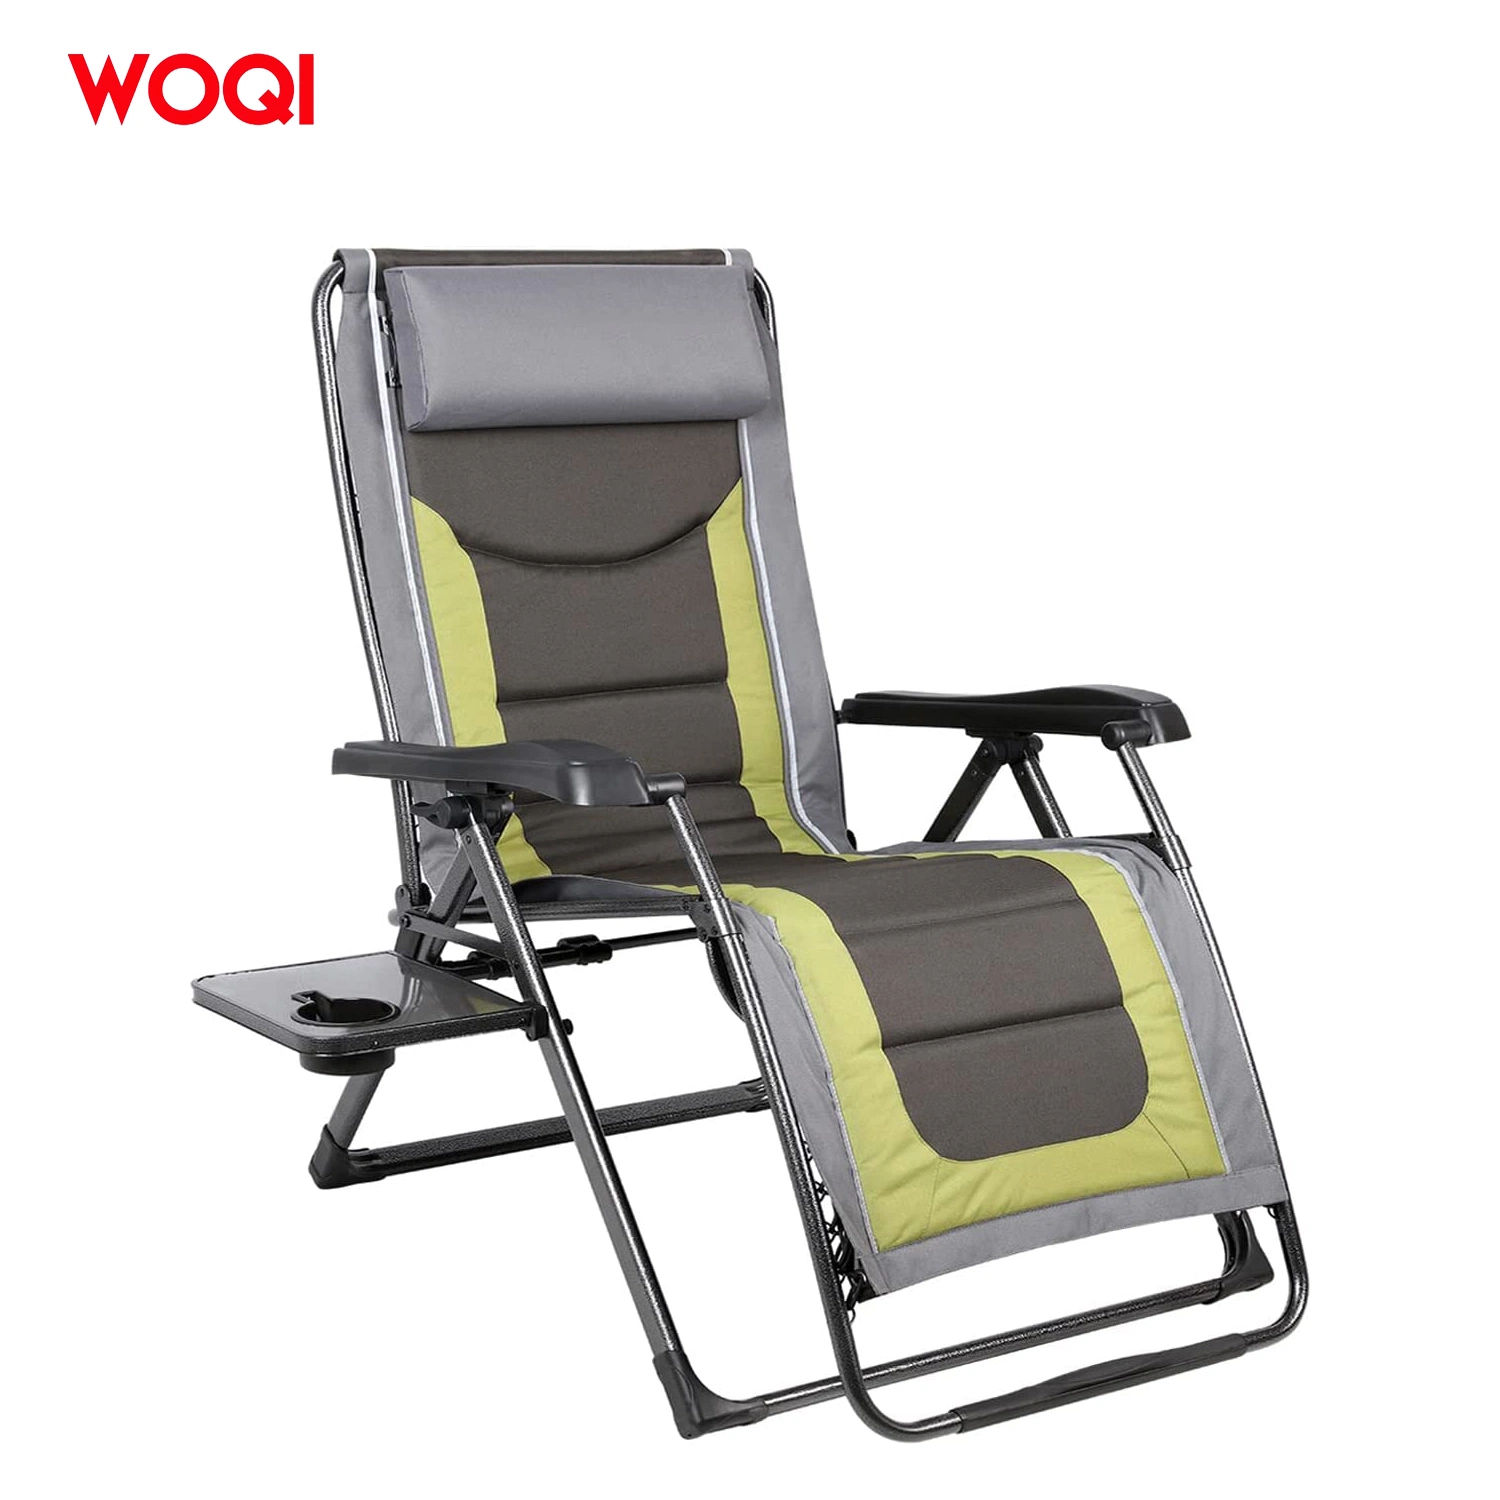 Woqi Folding Chair and Single Bed for Outdoor Furniture General Use